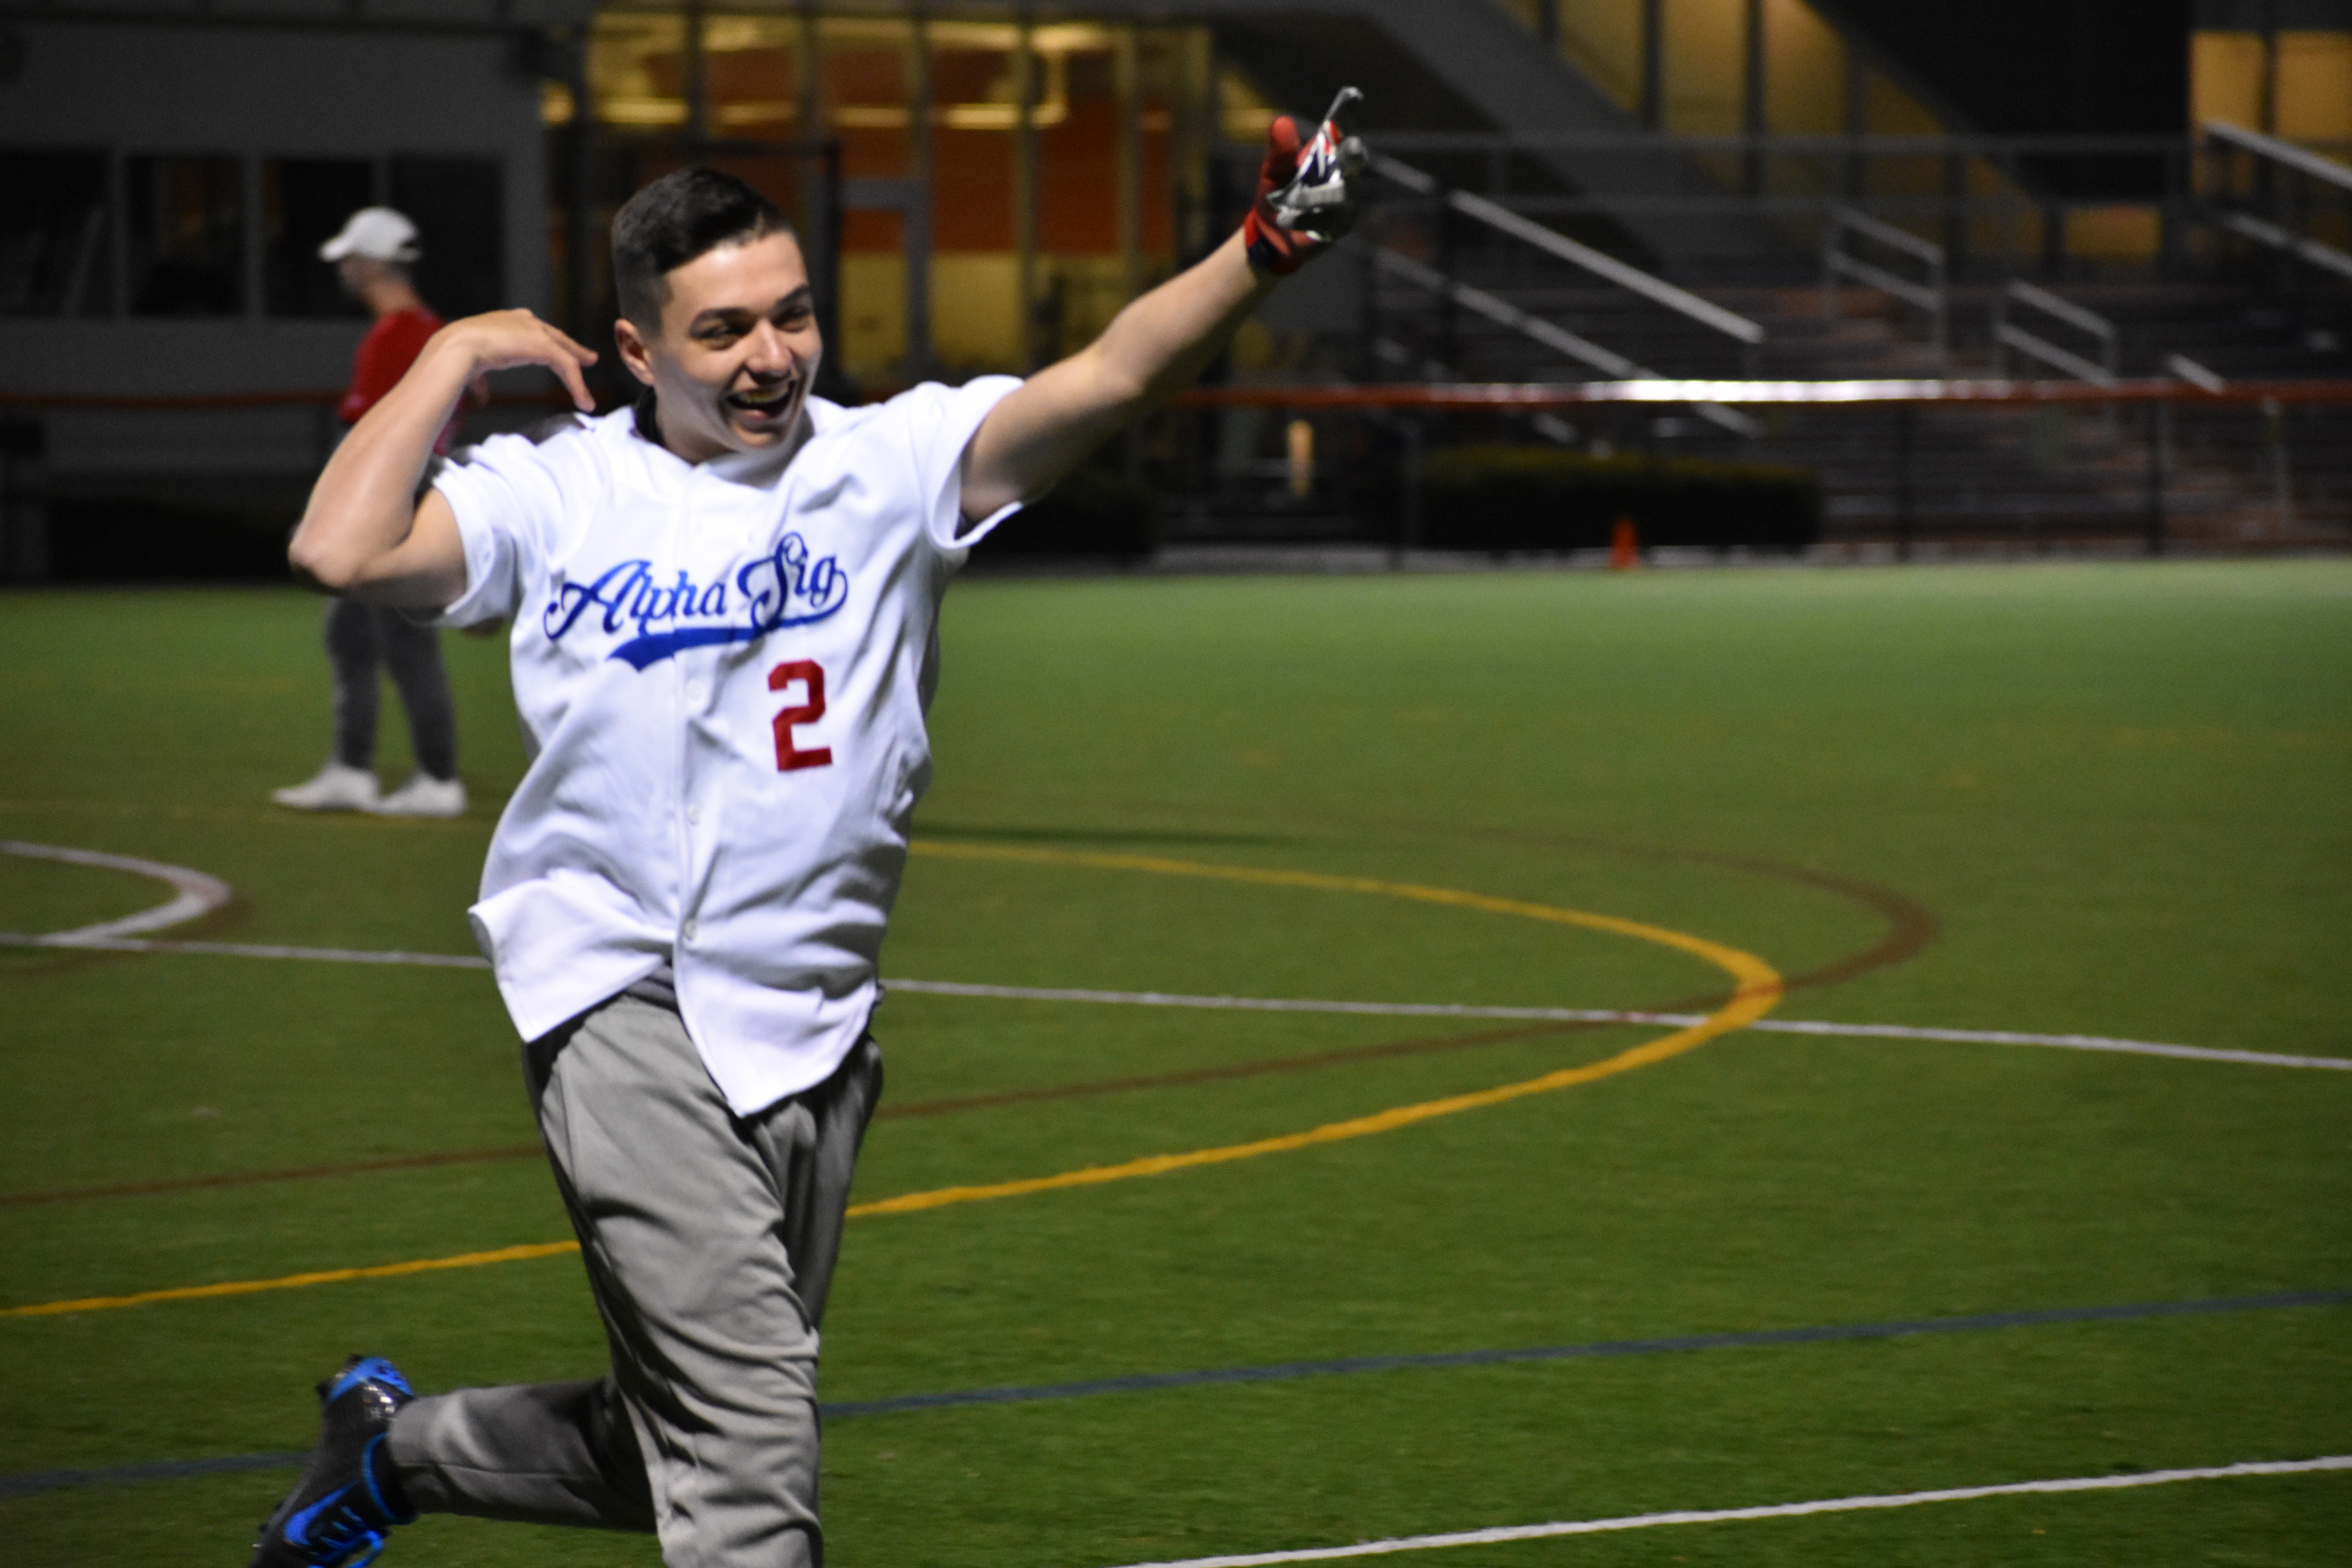 Intramural softball is back by popular request and kickball is a great opportun…